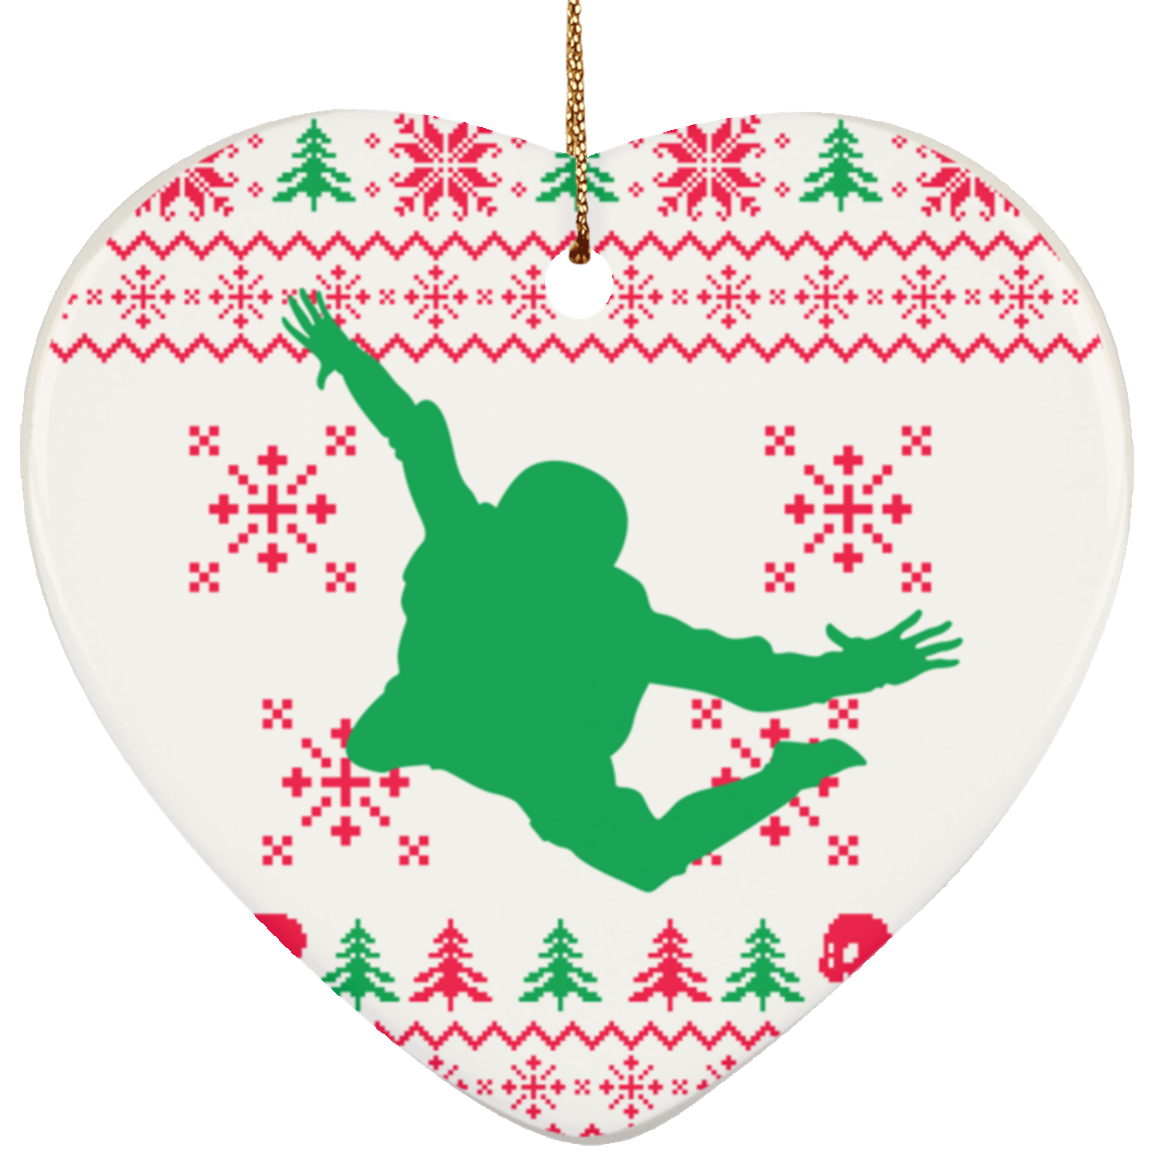 Skydiving Heart Ornament